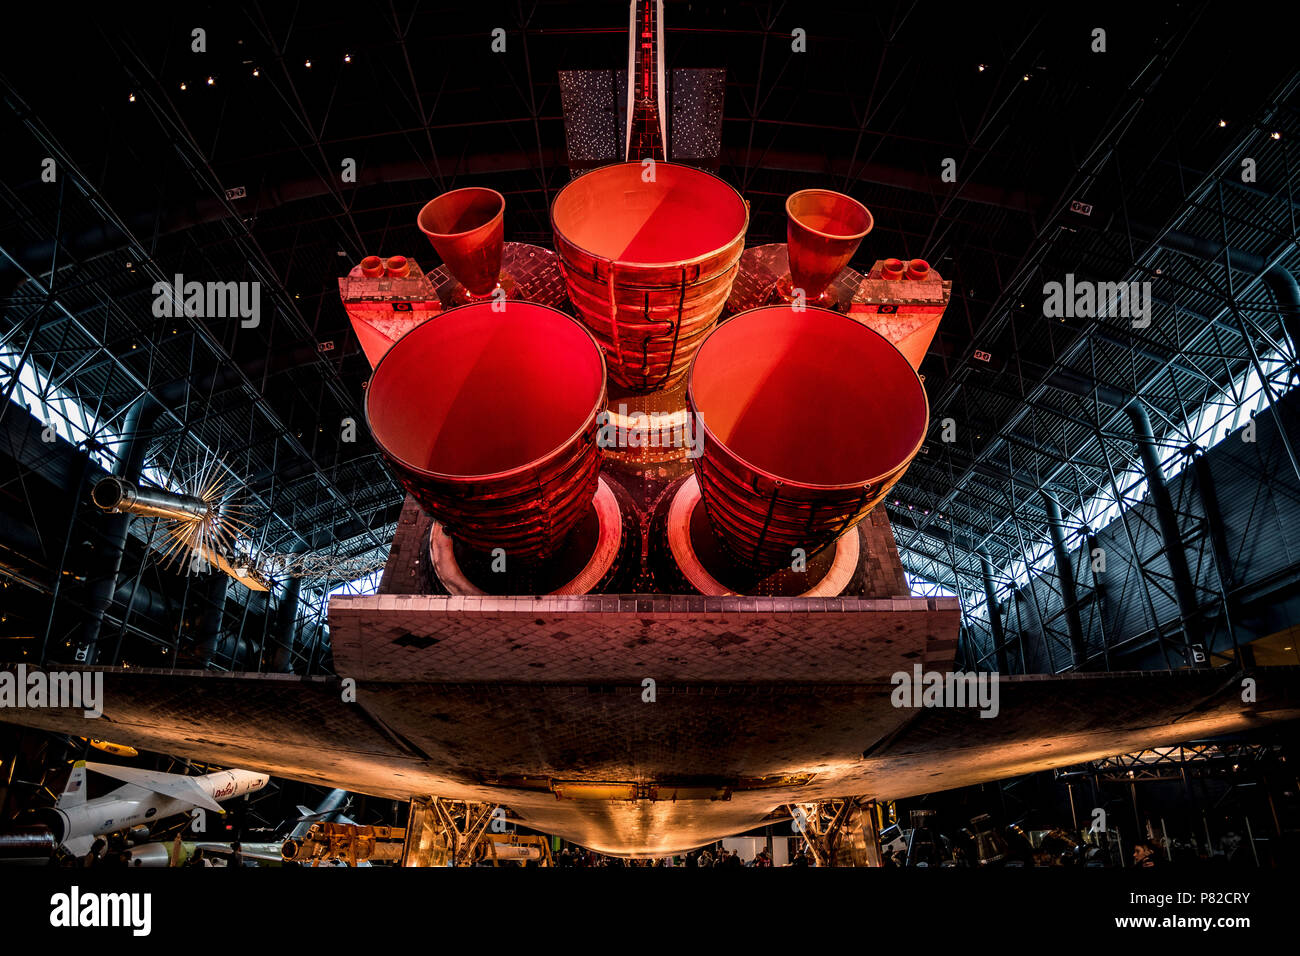 Rocket burners on the tail of the Space Shuttle Discovery on display at the Smithsonian Air and Space Museum's Udvar-Hazy Center in Chantilly, Virginia. Stock Photo